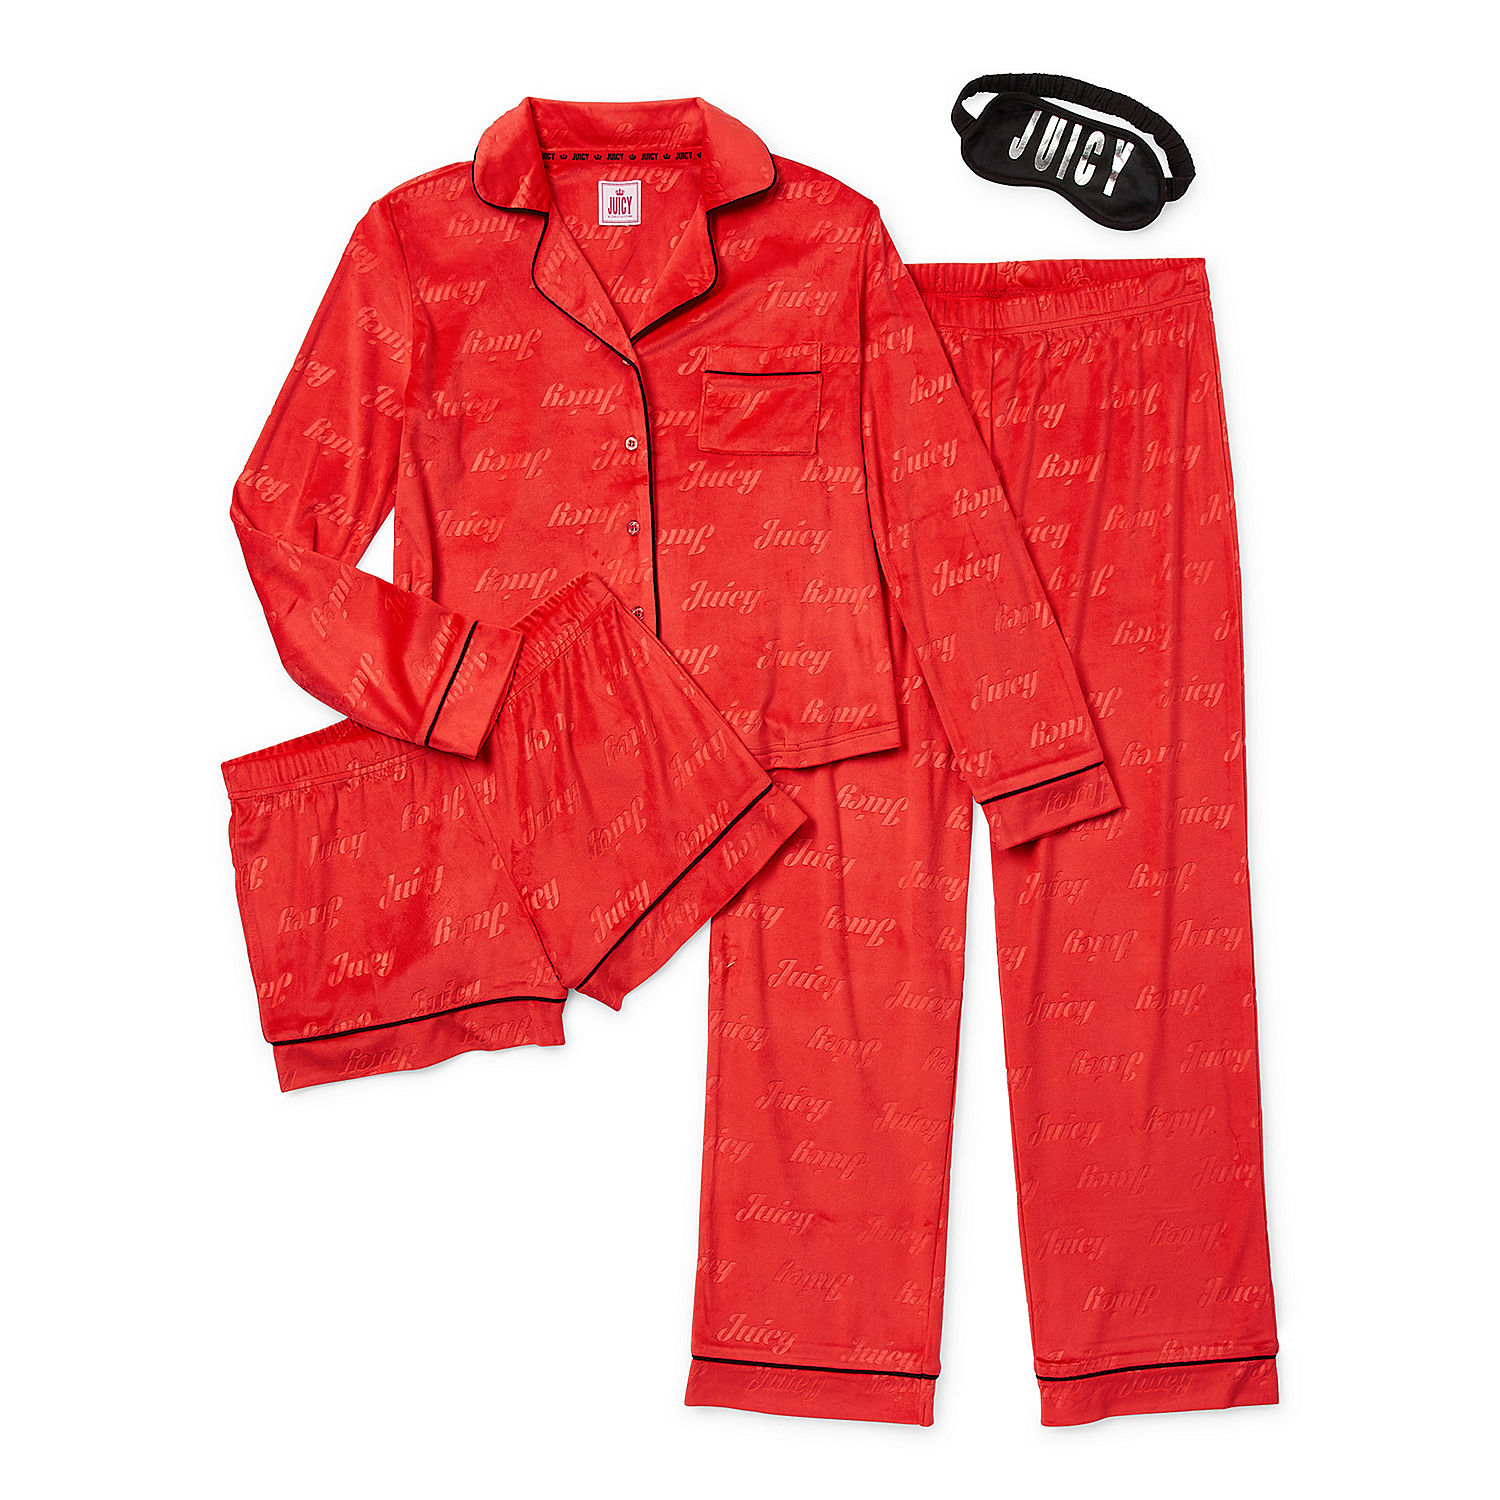 4-Piece Juicy By Juicy Couture Women's Long Sleeve Pant Pajama Set only  $15.79